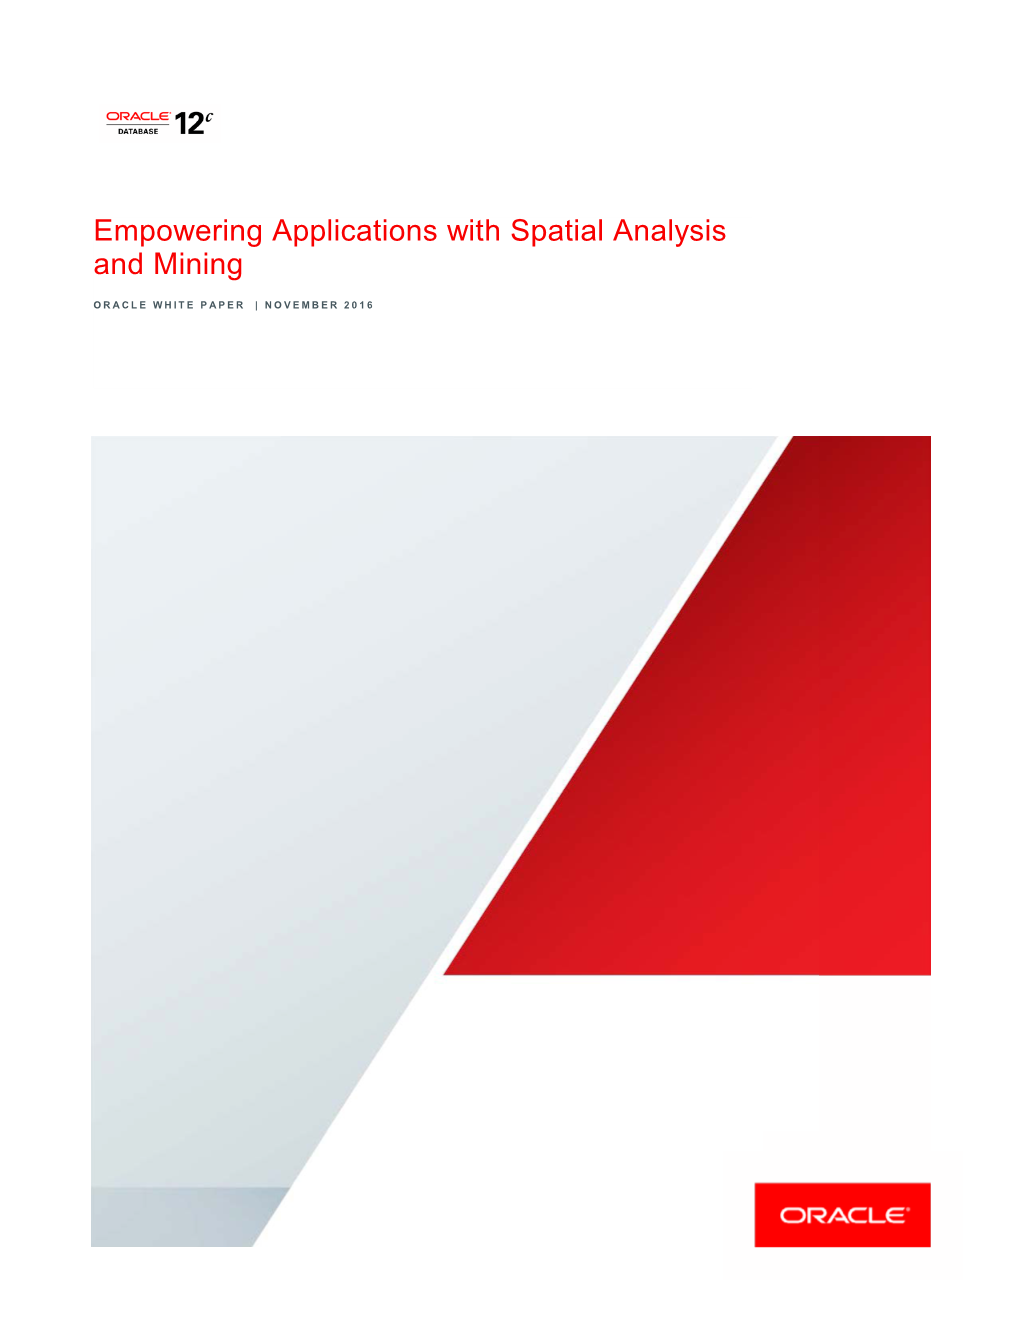 Empowering Applications with Spatial Analysis and Mining